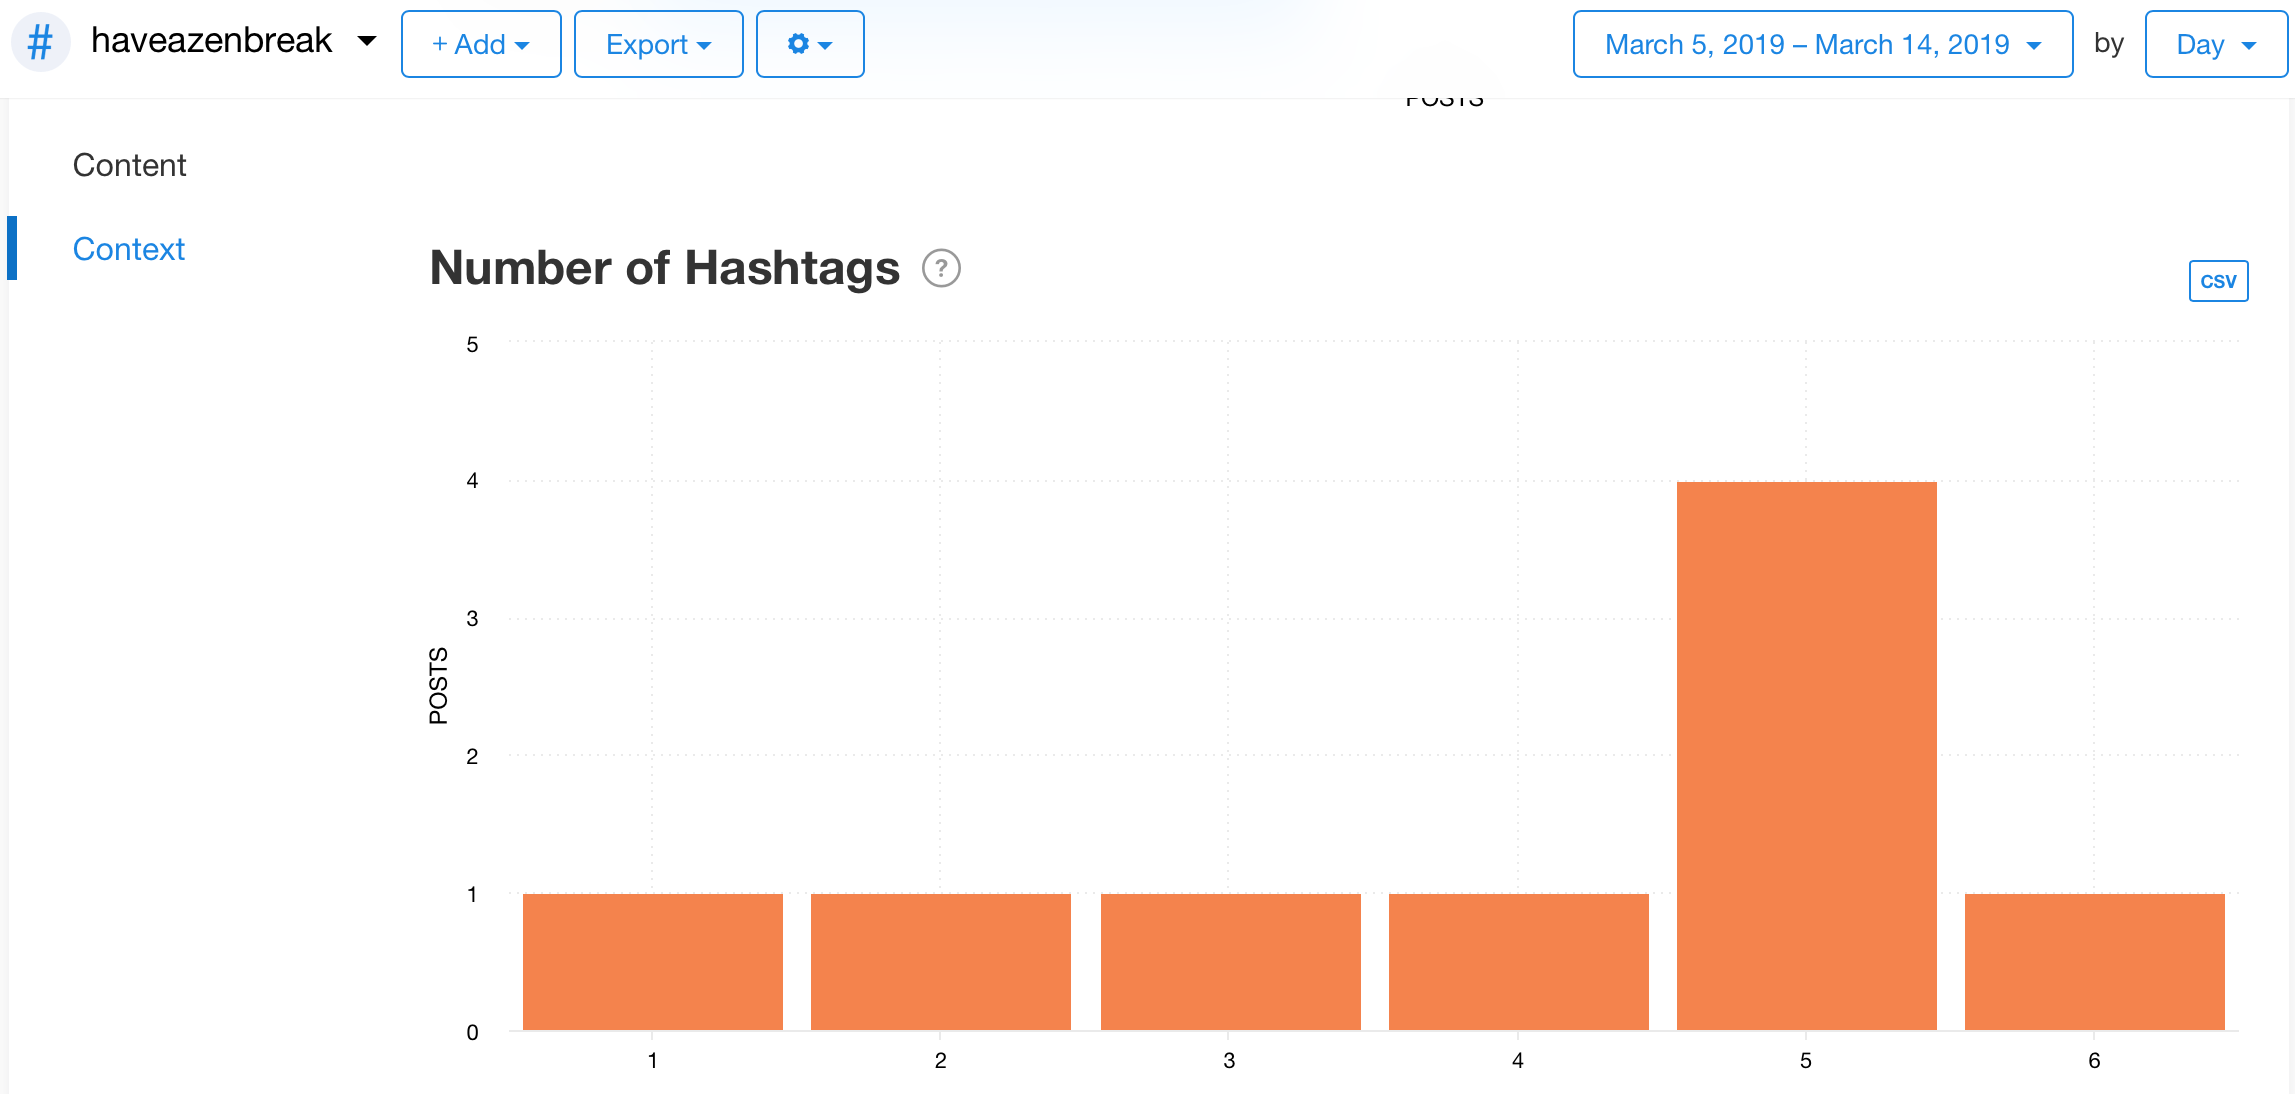 Number of Hashtags graph from Minter.io